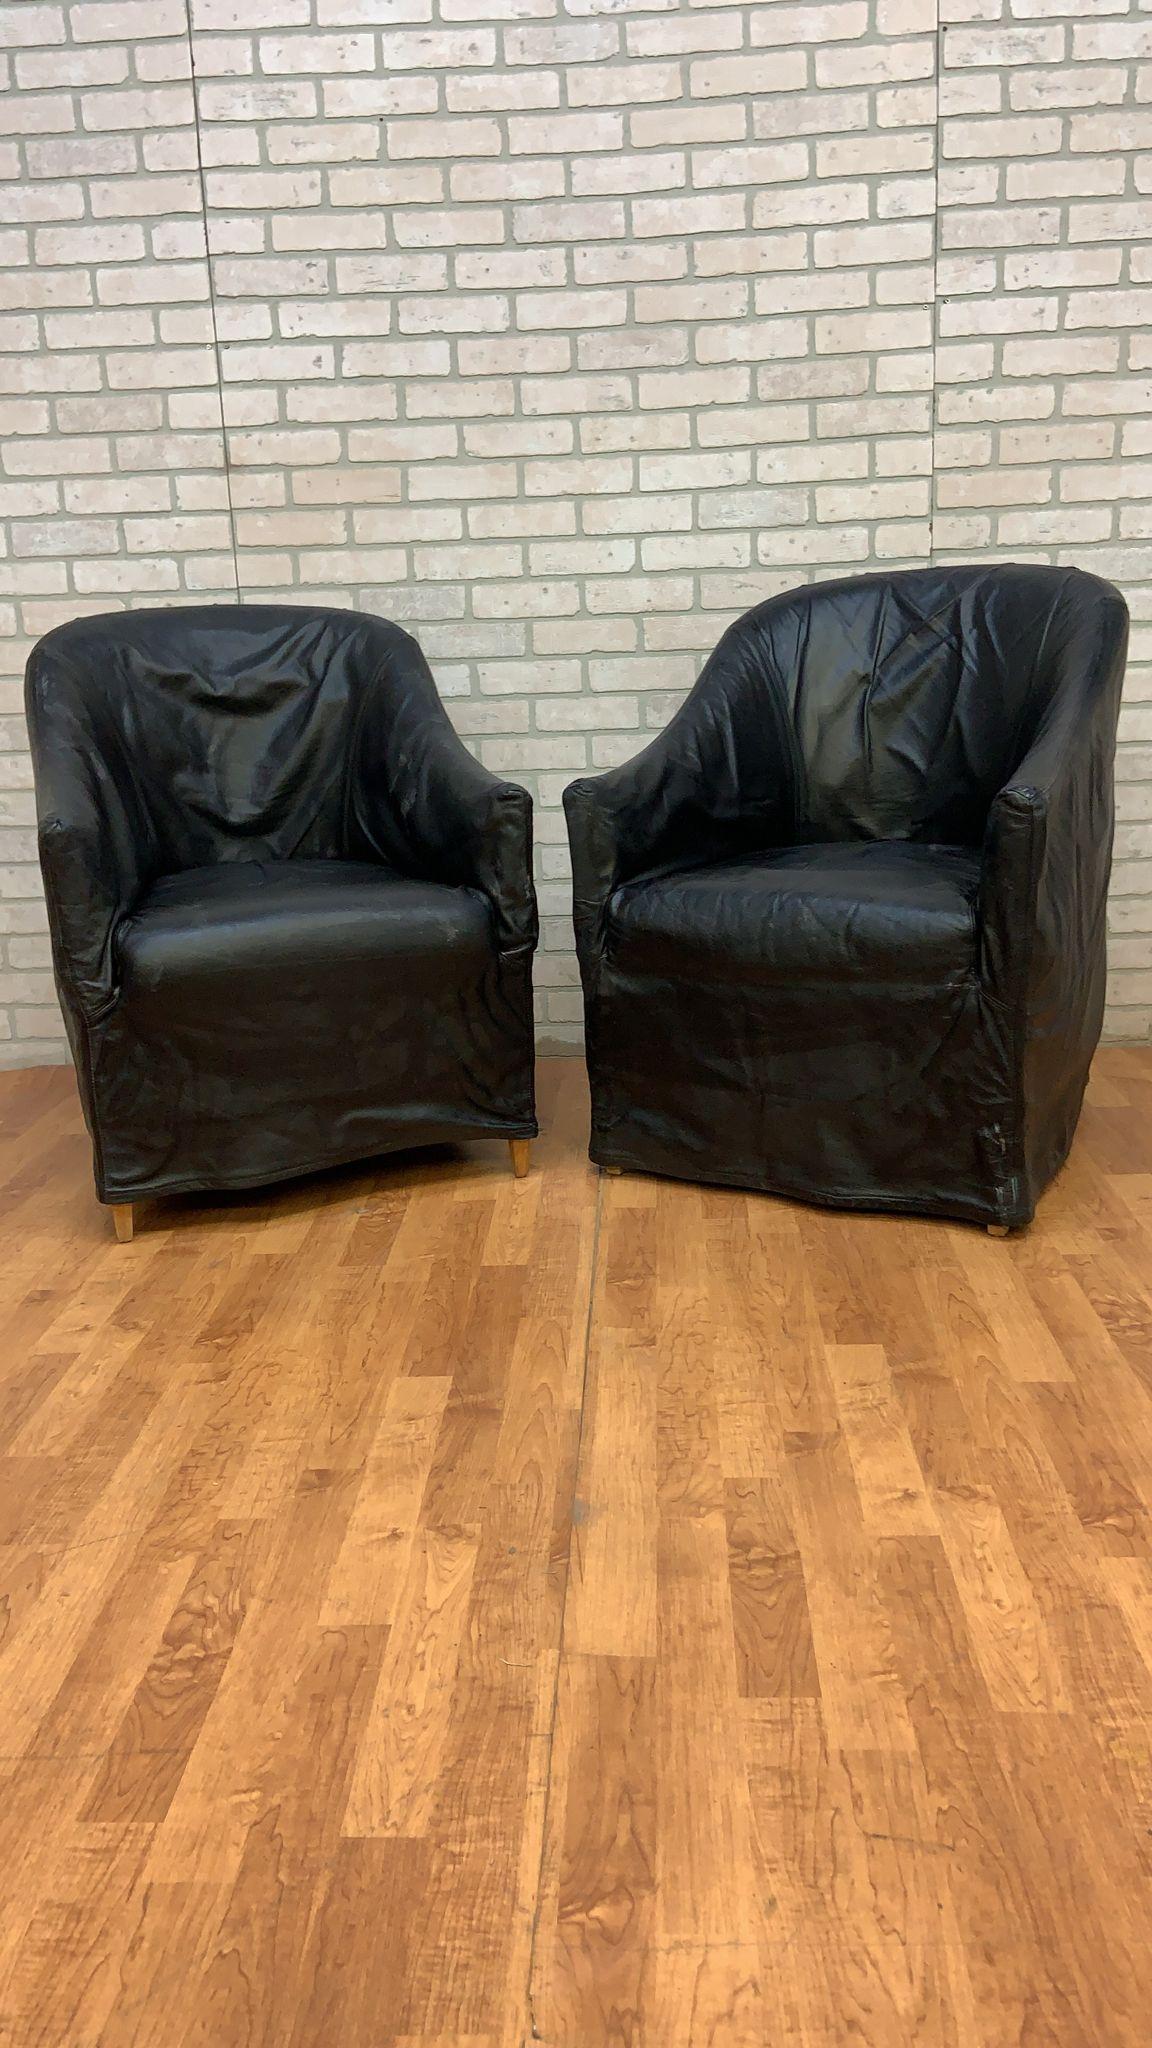 Vintage Mario Bellini Style Custom Fitted Black Italian Draped Leather Barrel Back Club Chairs by Niedermaier - Pair 

Chic Raw Cut Full-Grain Black Italian Leather Custom Fitted with Precious Stitching Finishes, Barrel Back & Flared Arms with